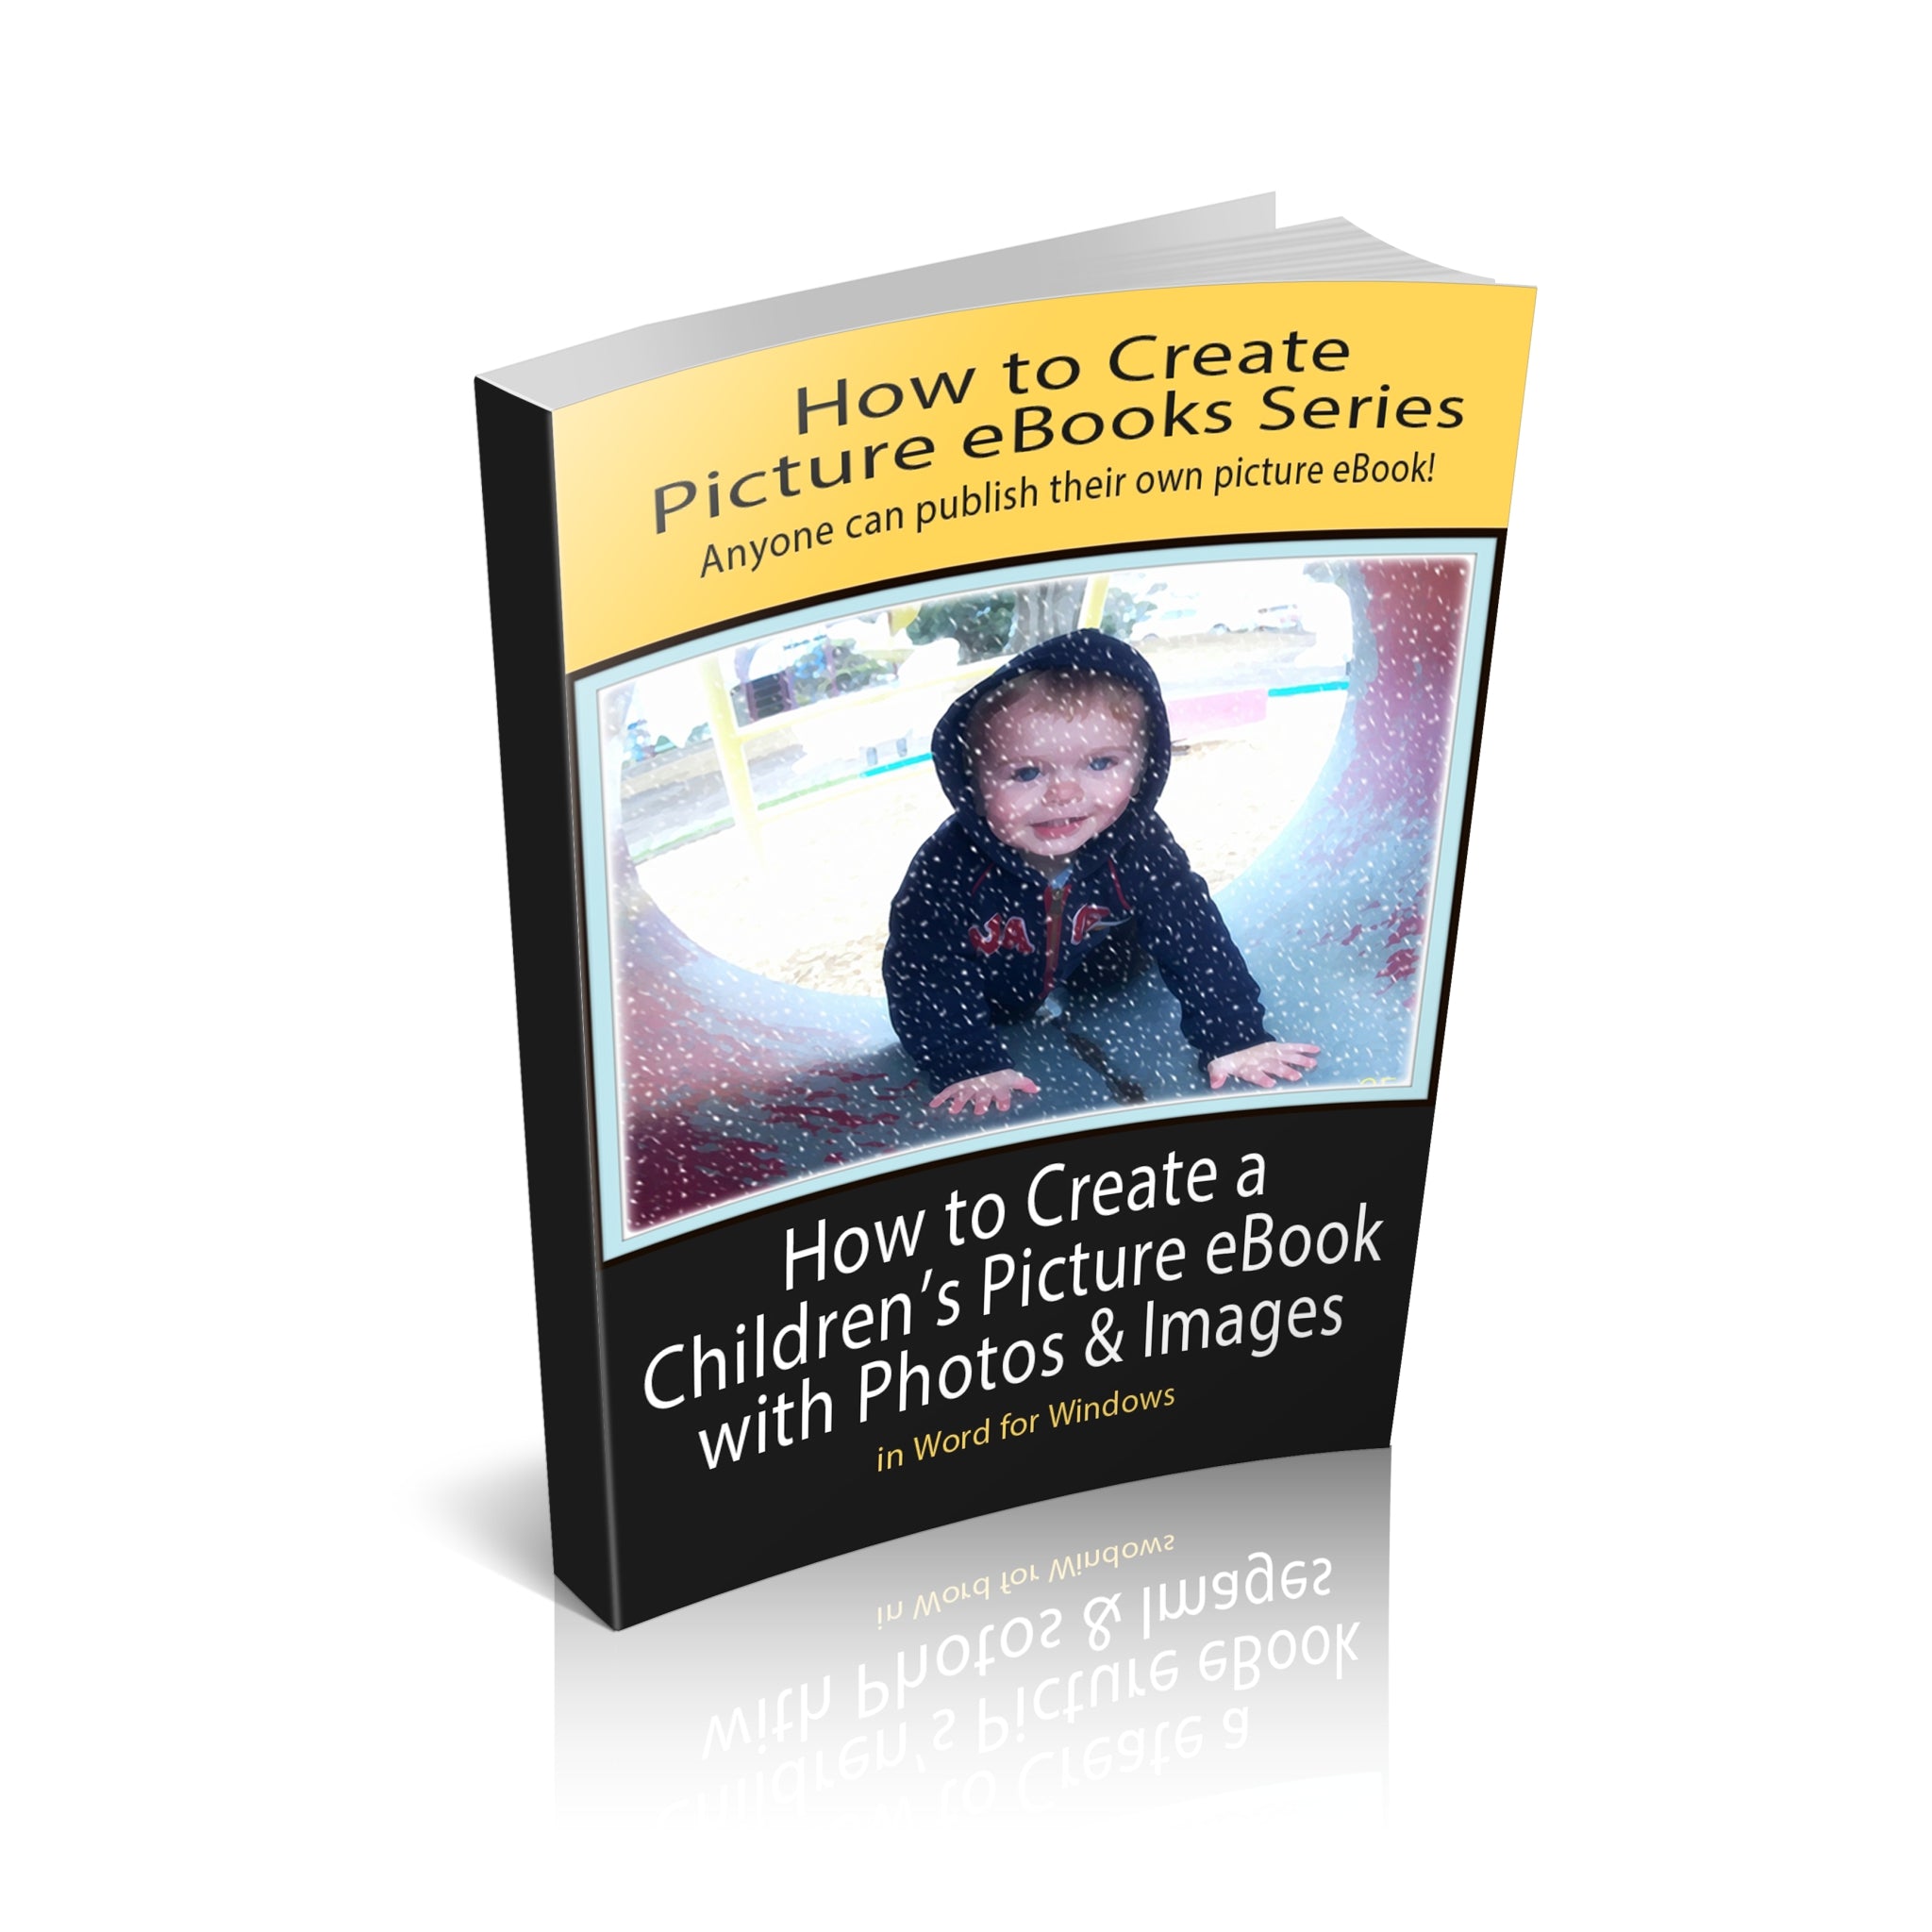 How To Create a Childrens Picture Ebook With Photos and Images In Word Ebook